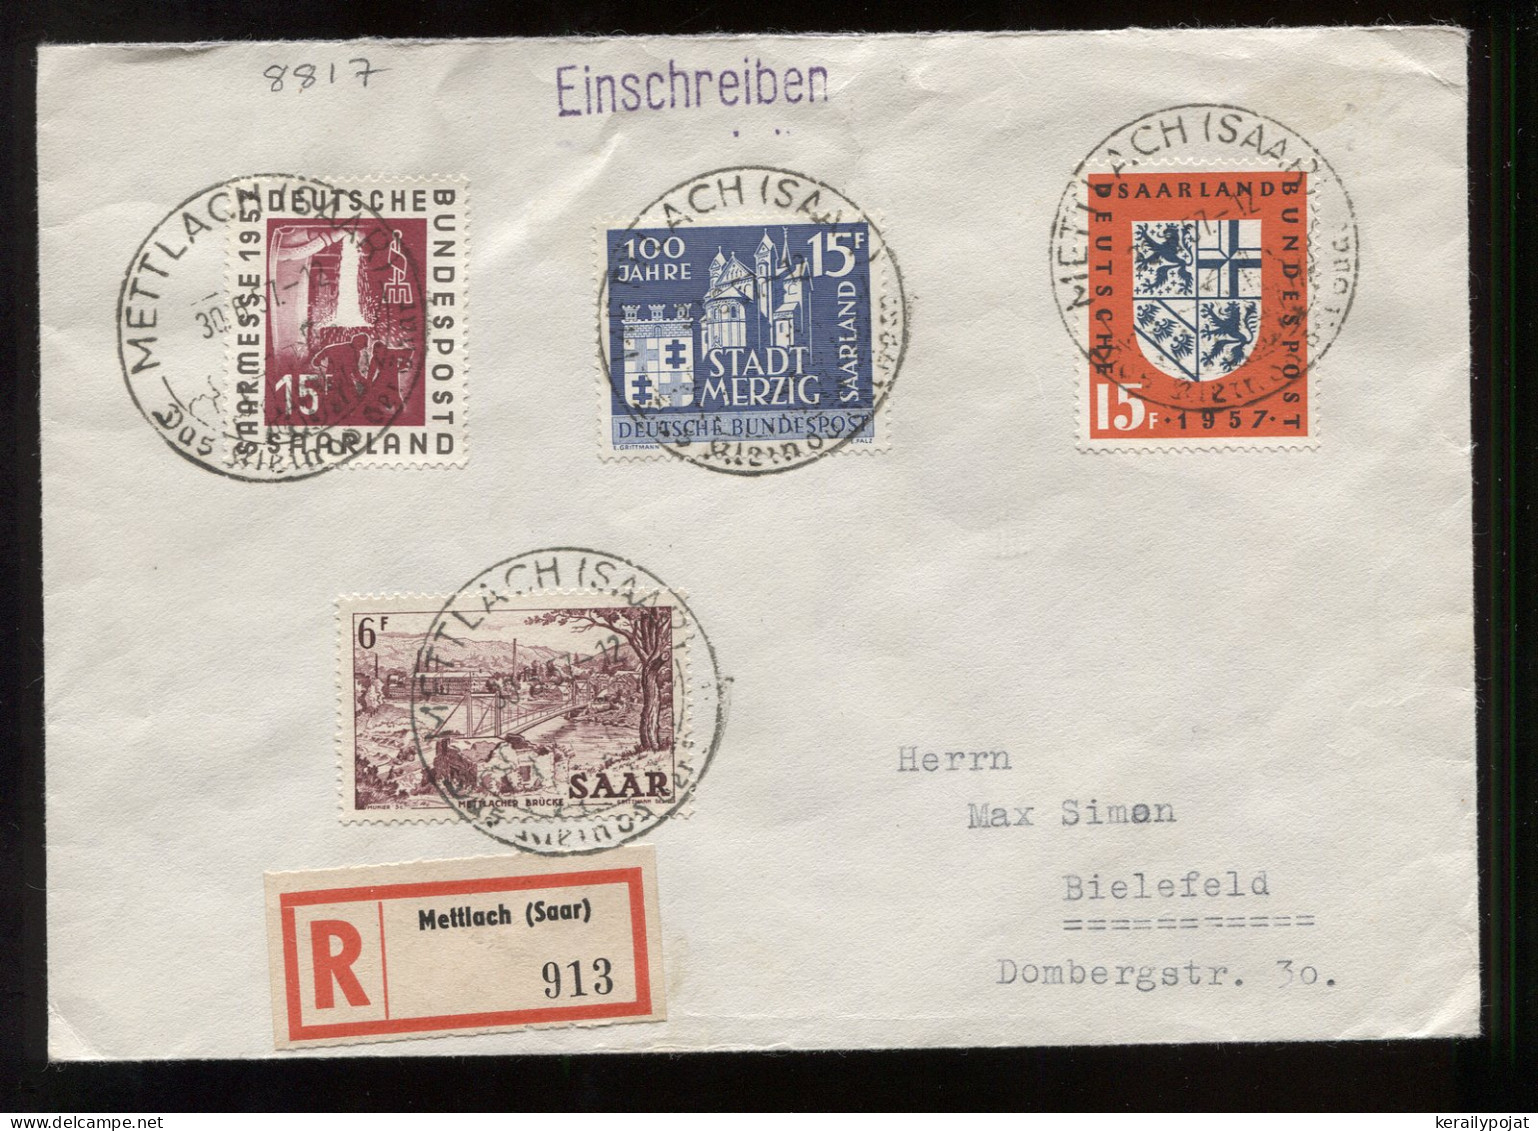 Saarland 1957 Mettlach Registered Cover To Bielefeld__(8817) - Covers & Documents